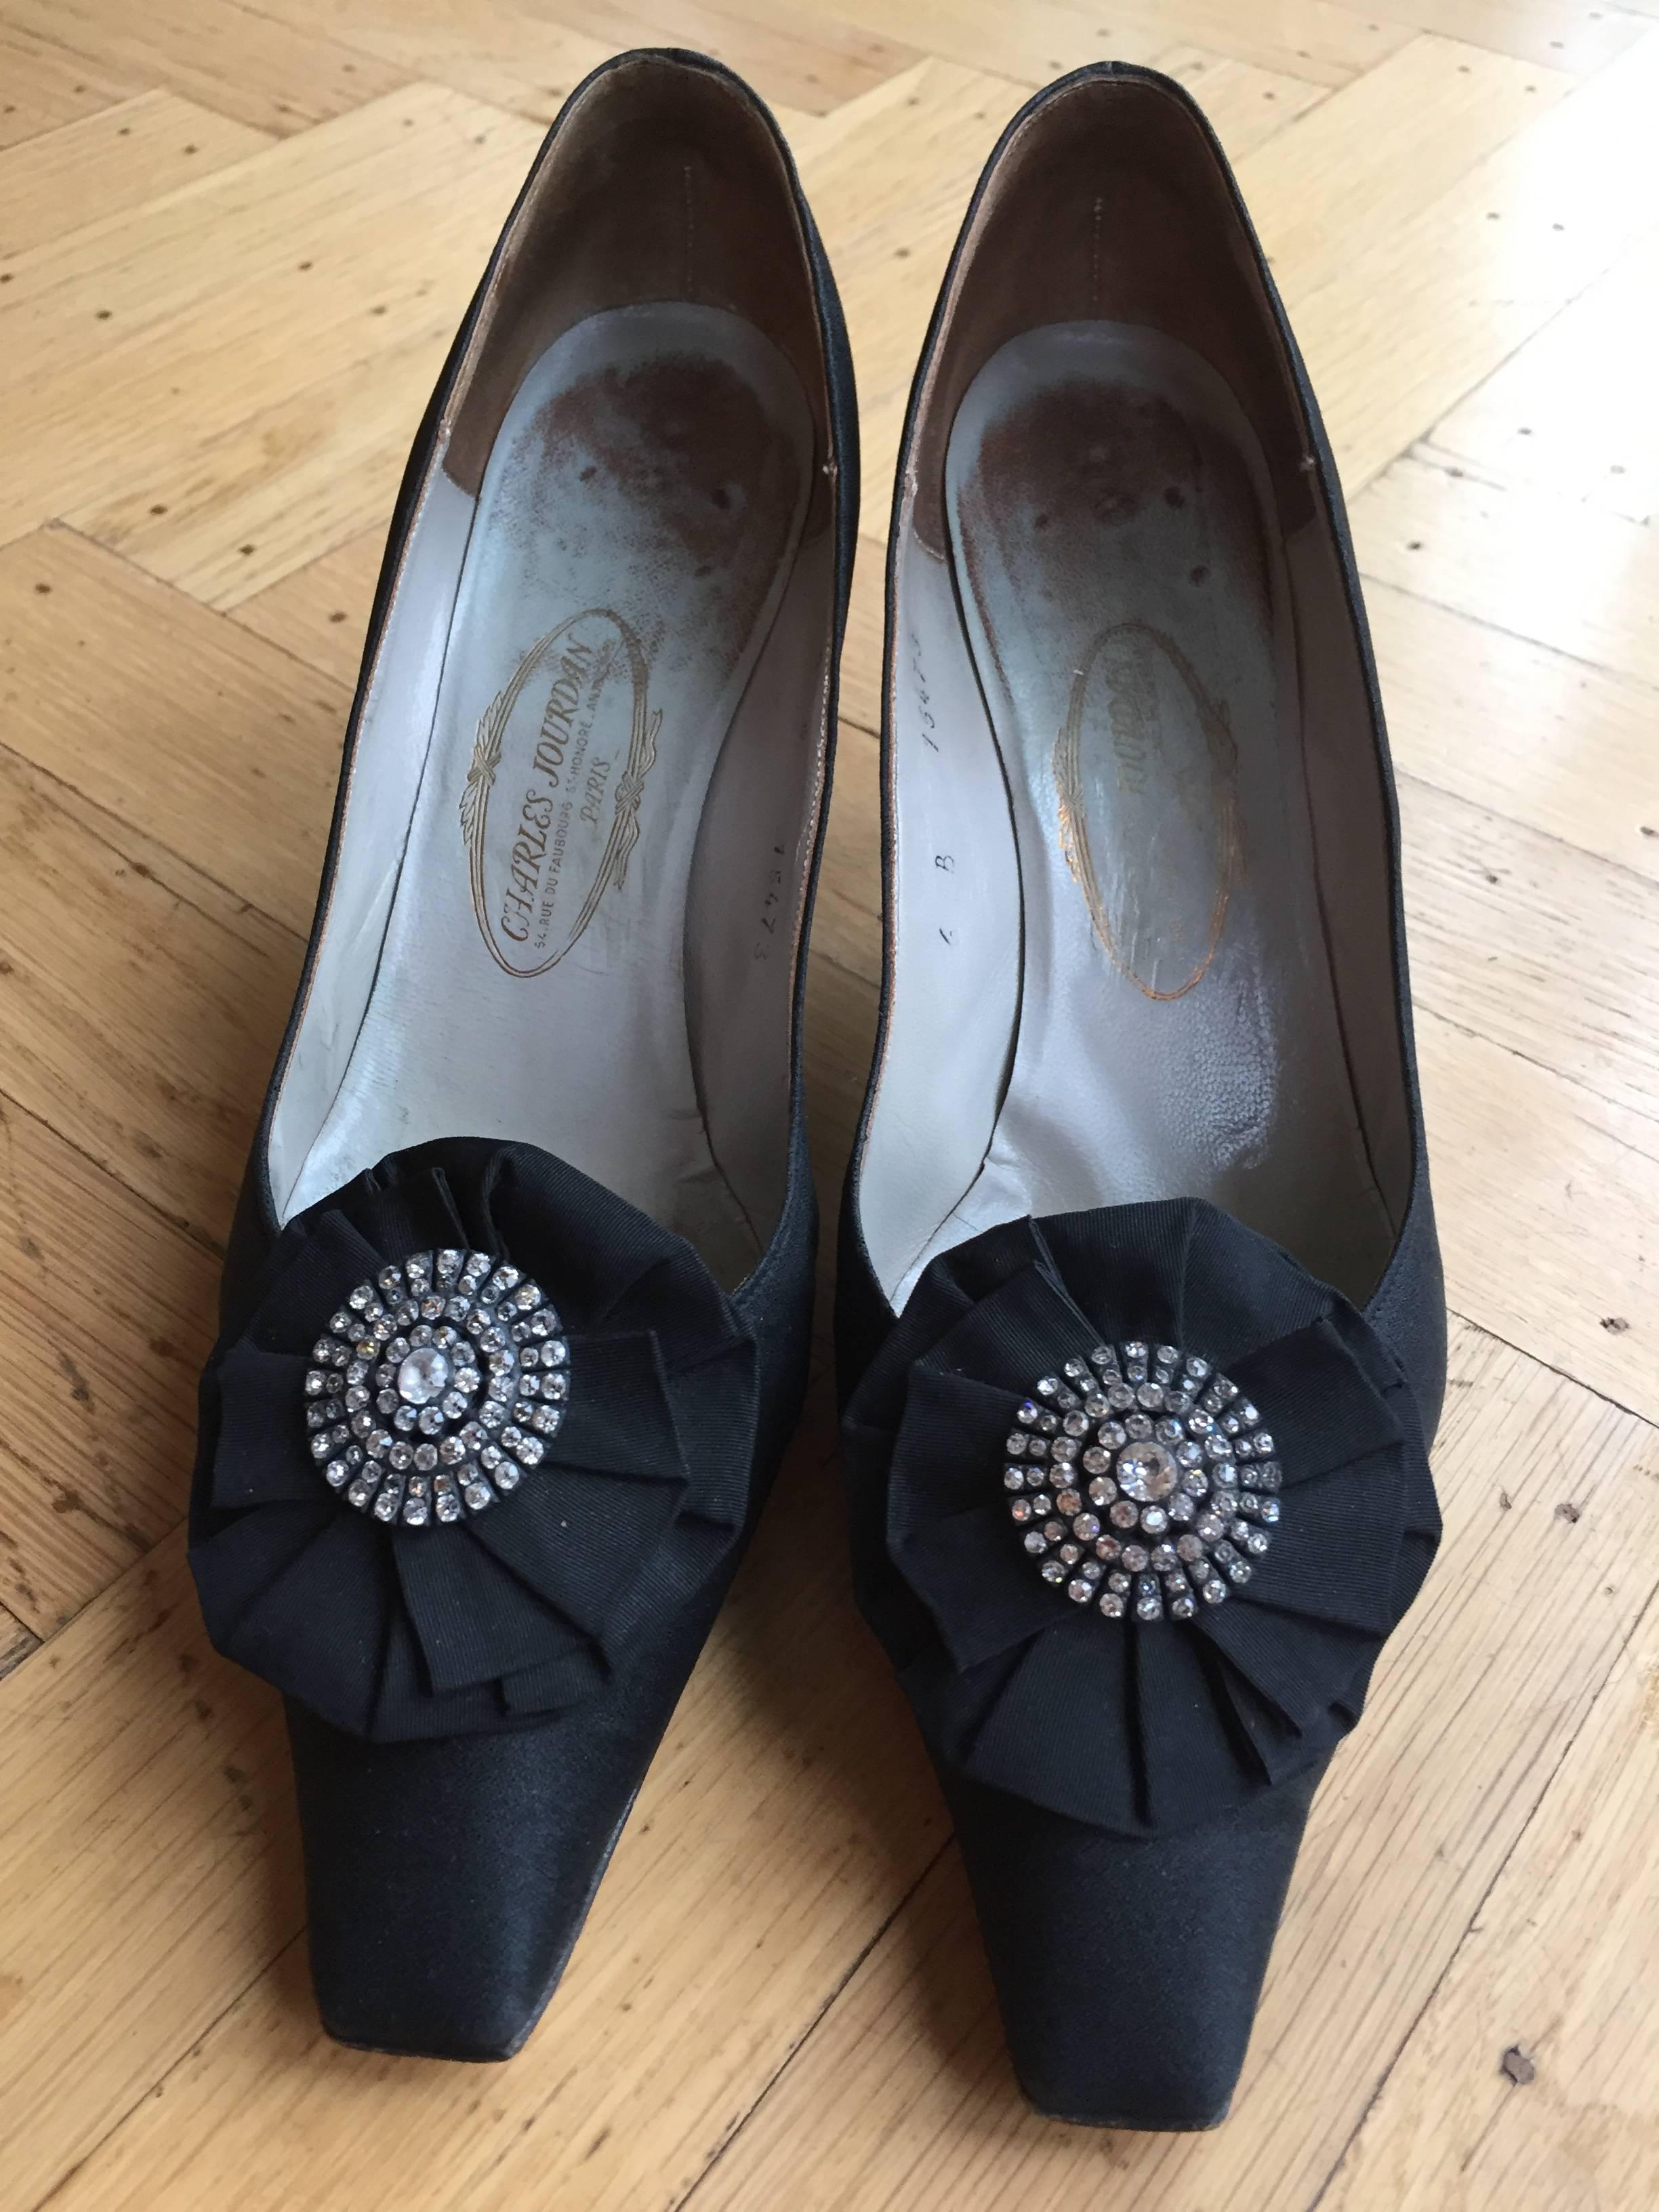 Beautiful black silk pumps with jeweled florets on the toes from Charles Joiurdan , designed for Christian Dior Couture 1959.
 Made to measure for Eleanor.
She wore size 6 and 6 1/2
From the collection of Eleanor Louise Christenson de